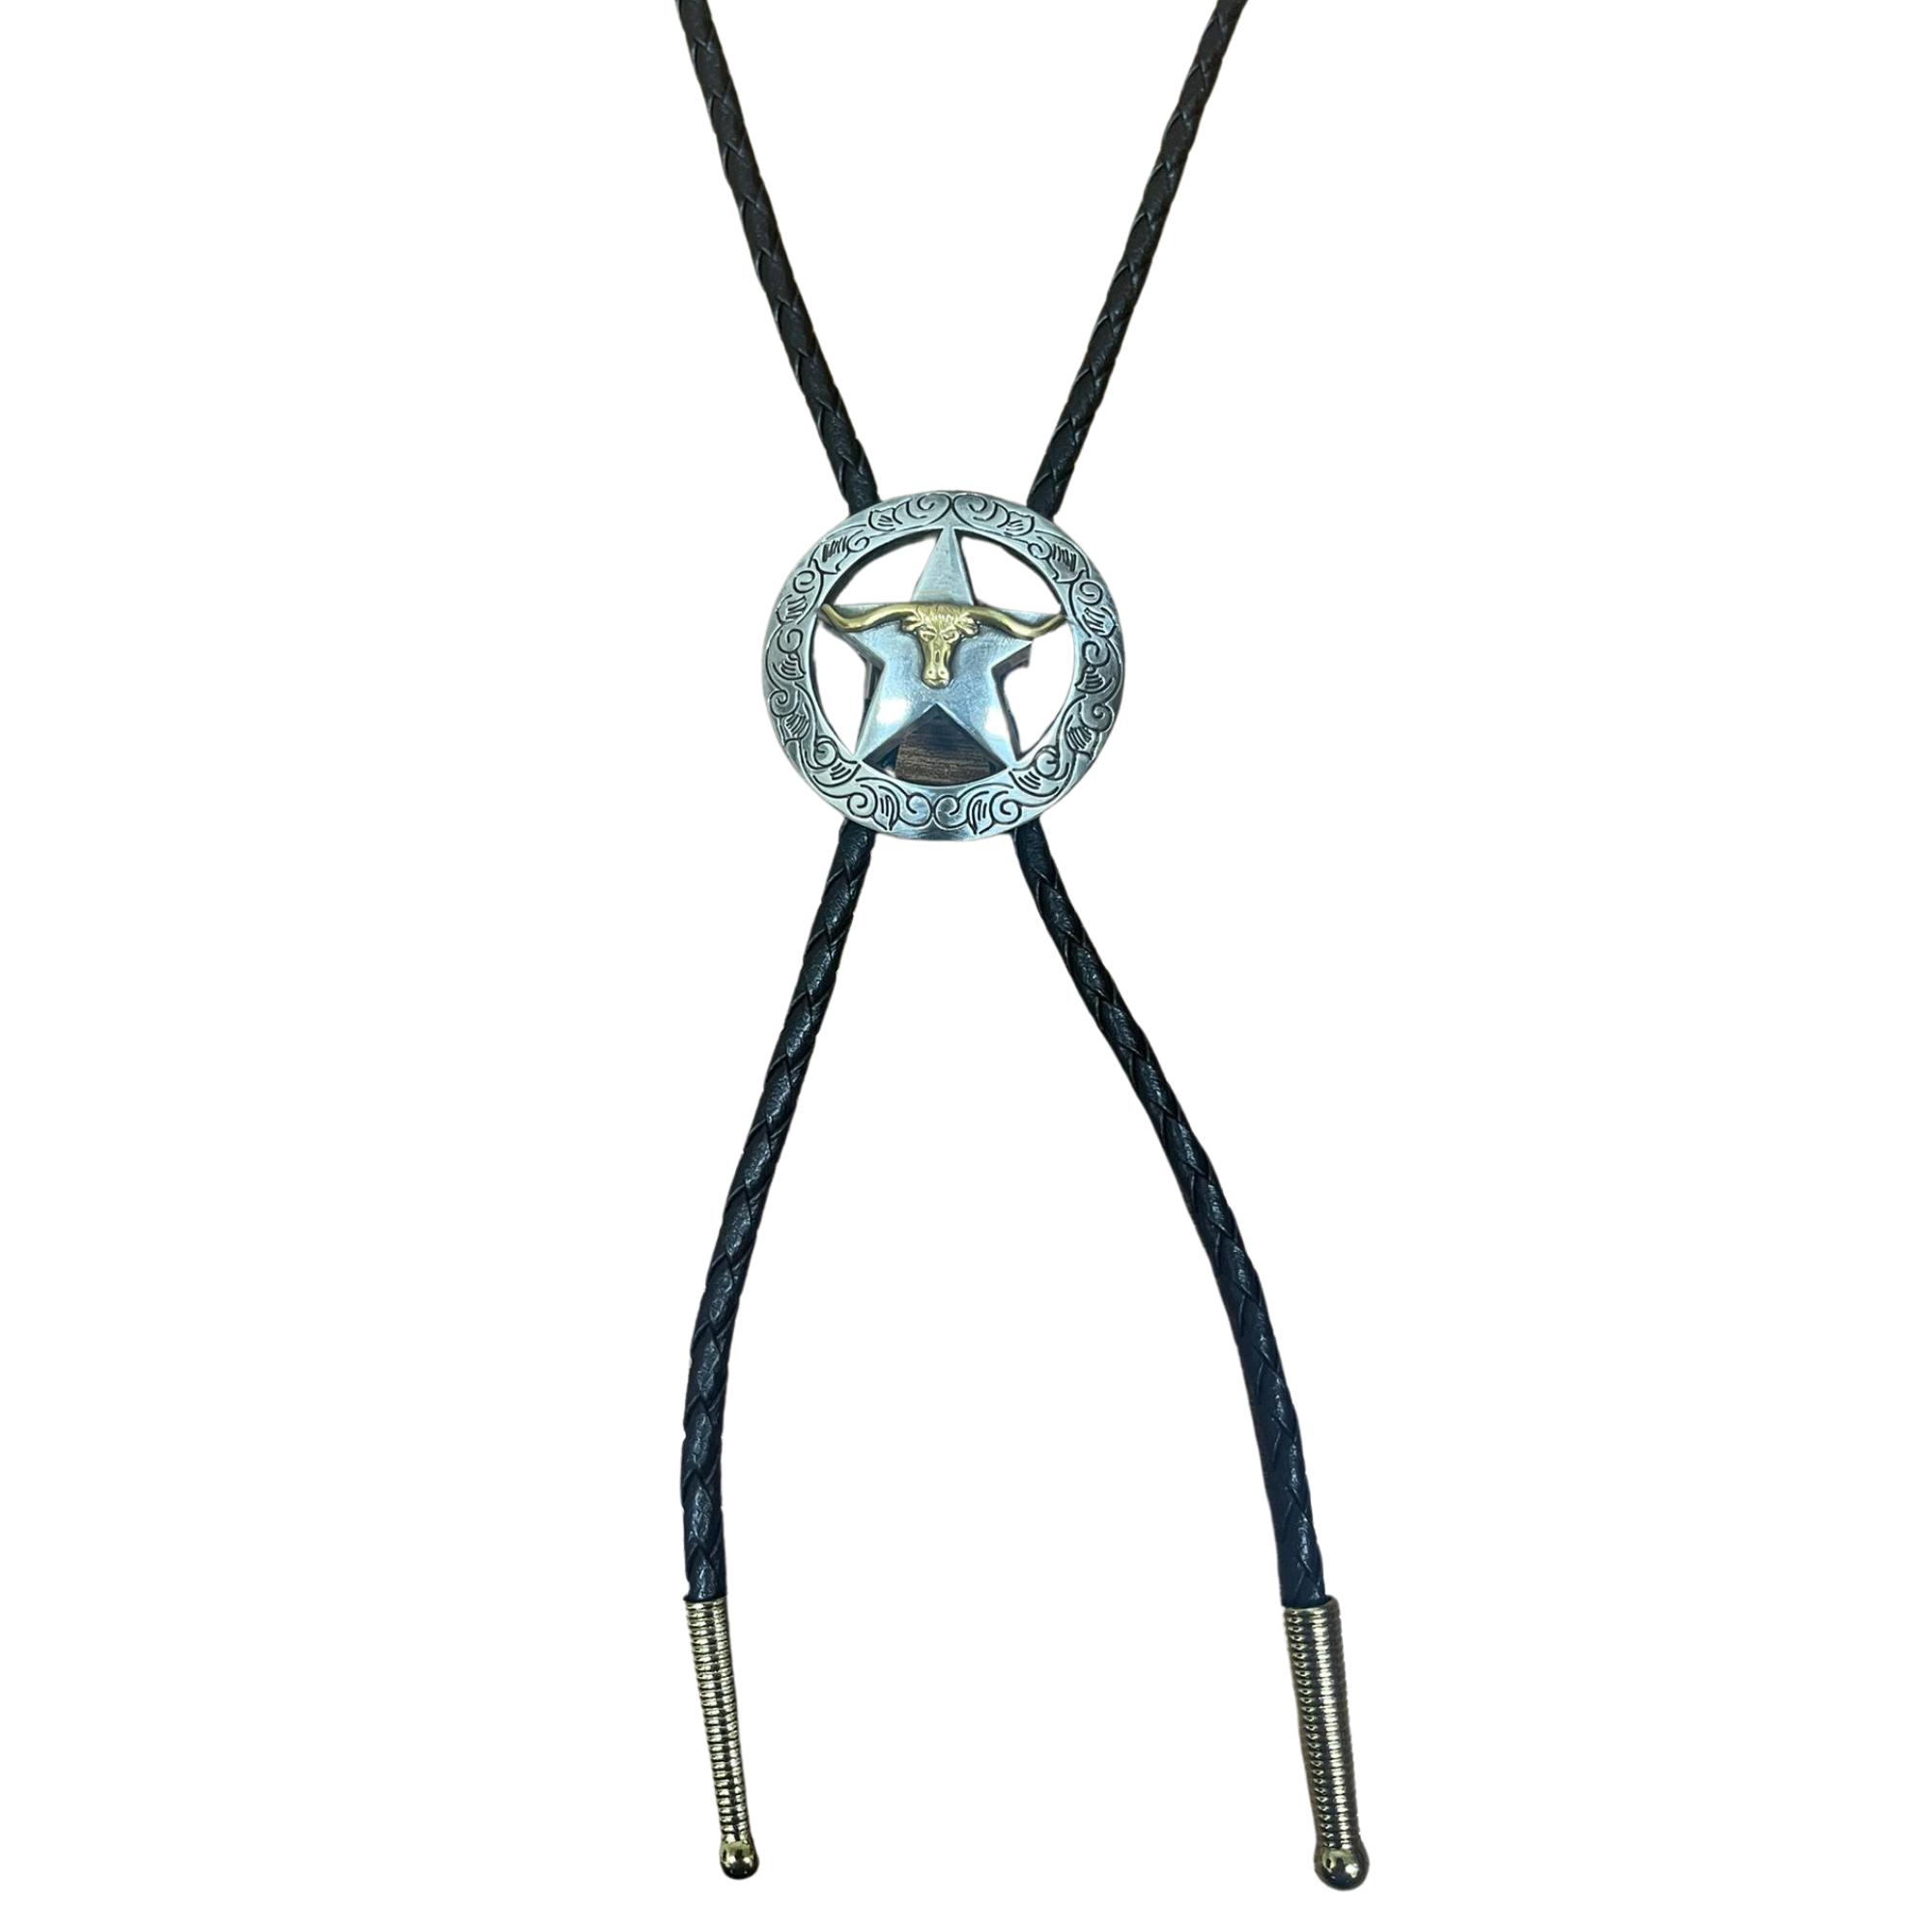 STAR THE STATE OF TEXAS RANGER SILVER RODEO COWBOY BOLOTIE WESTERN BOLO TIE